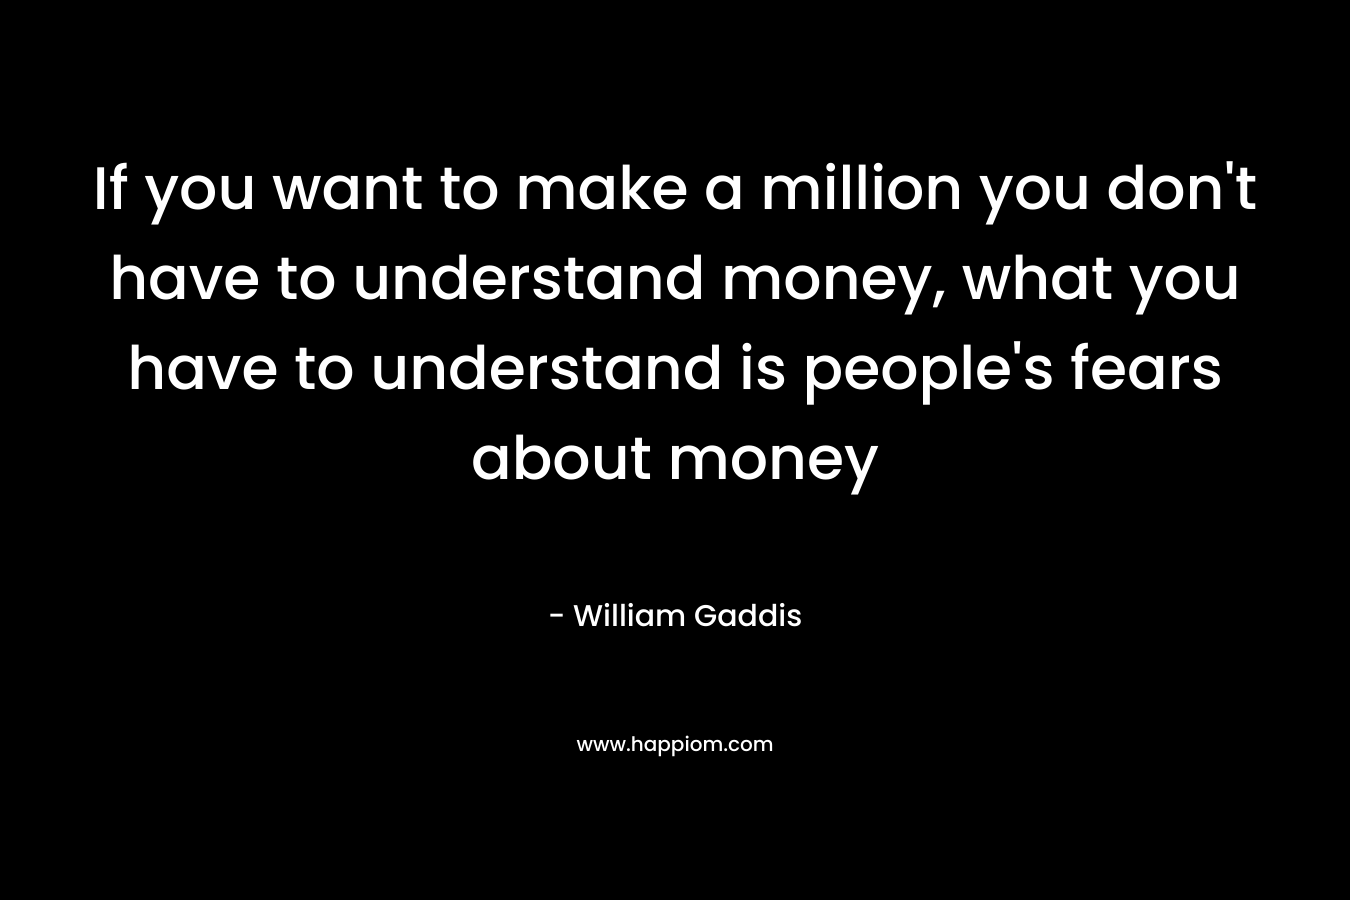 If you want to make a million you don't have to understand money, what you have to understand is people's fears about money